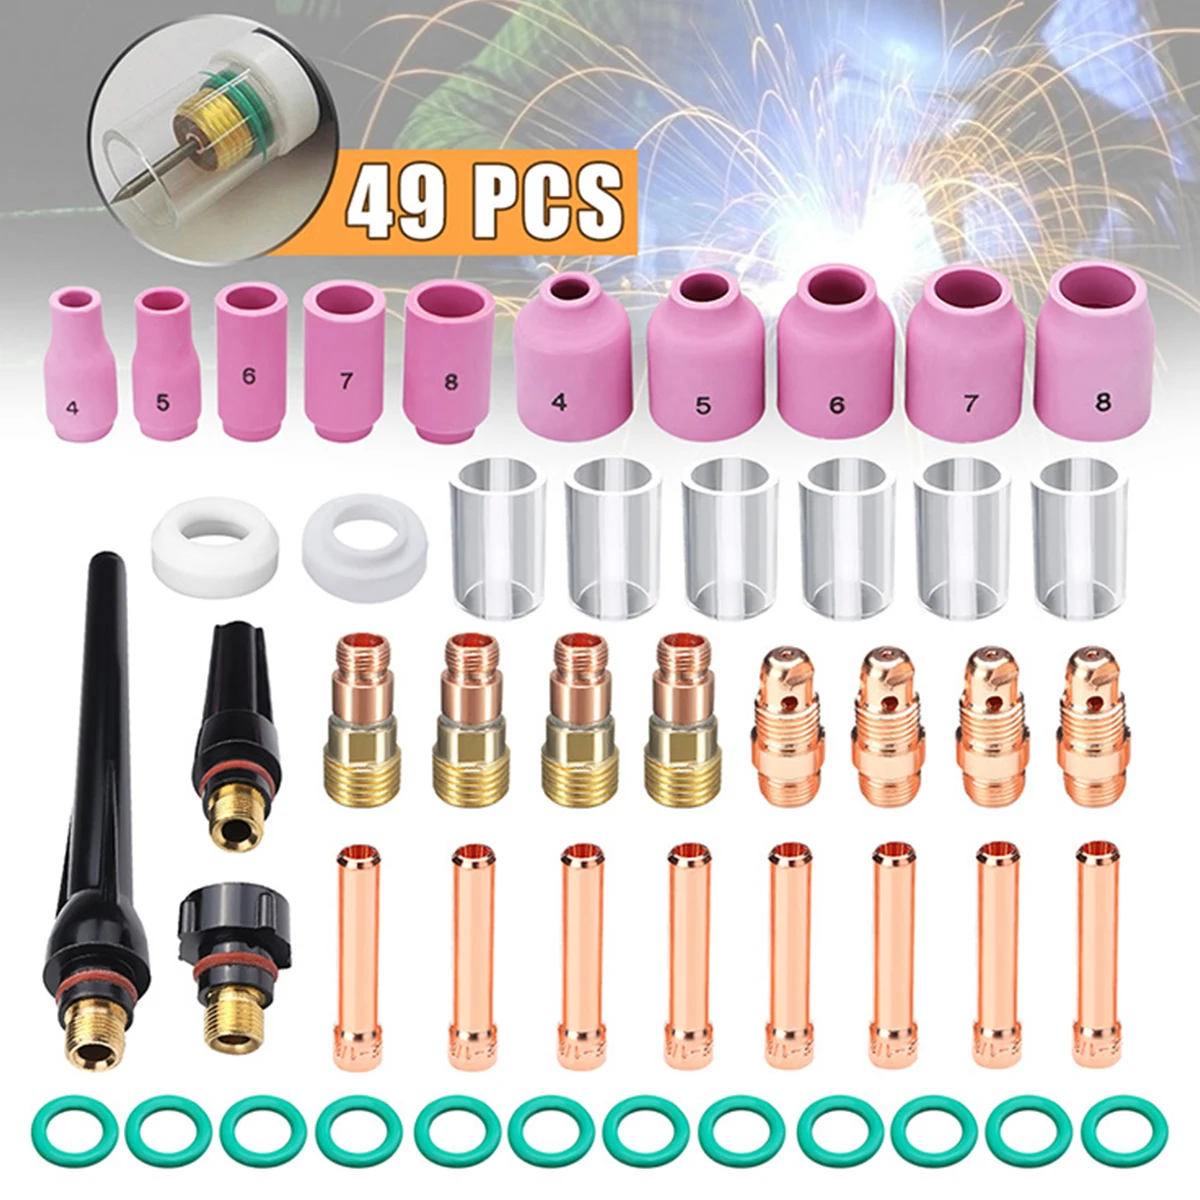 

49pcs TIG Welding Machine Torch Accessories Kit Alumina Nozzle Stubby Gas Lens 10 Pyrex Cup Kit For TIG WP-17/18/26 Tools